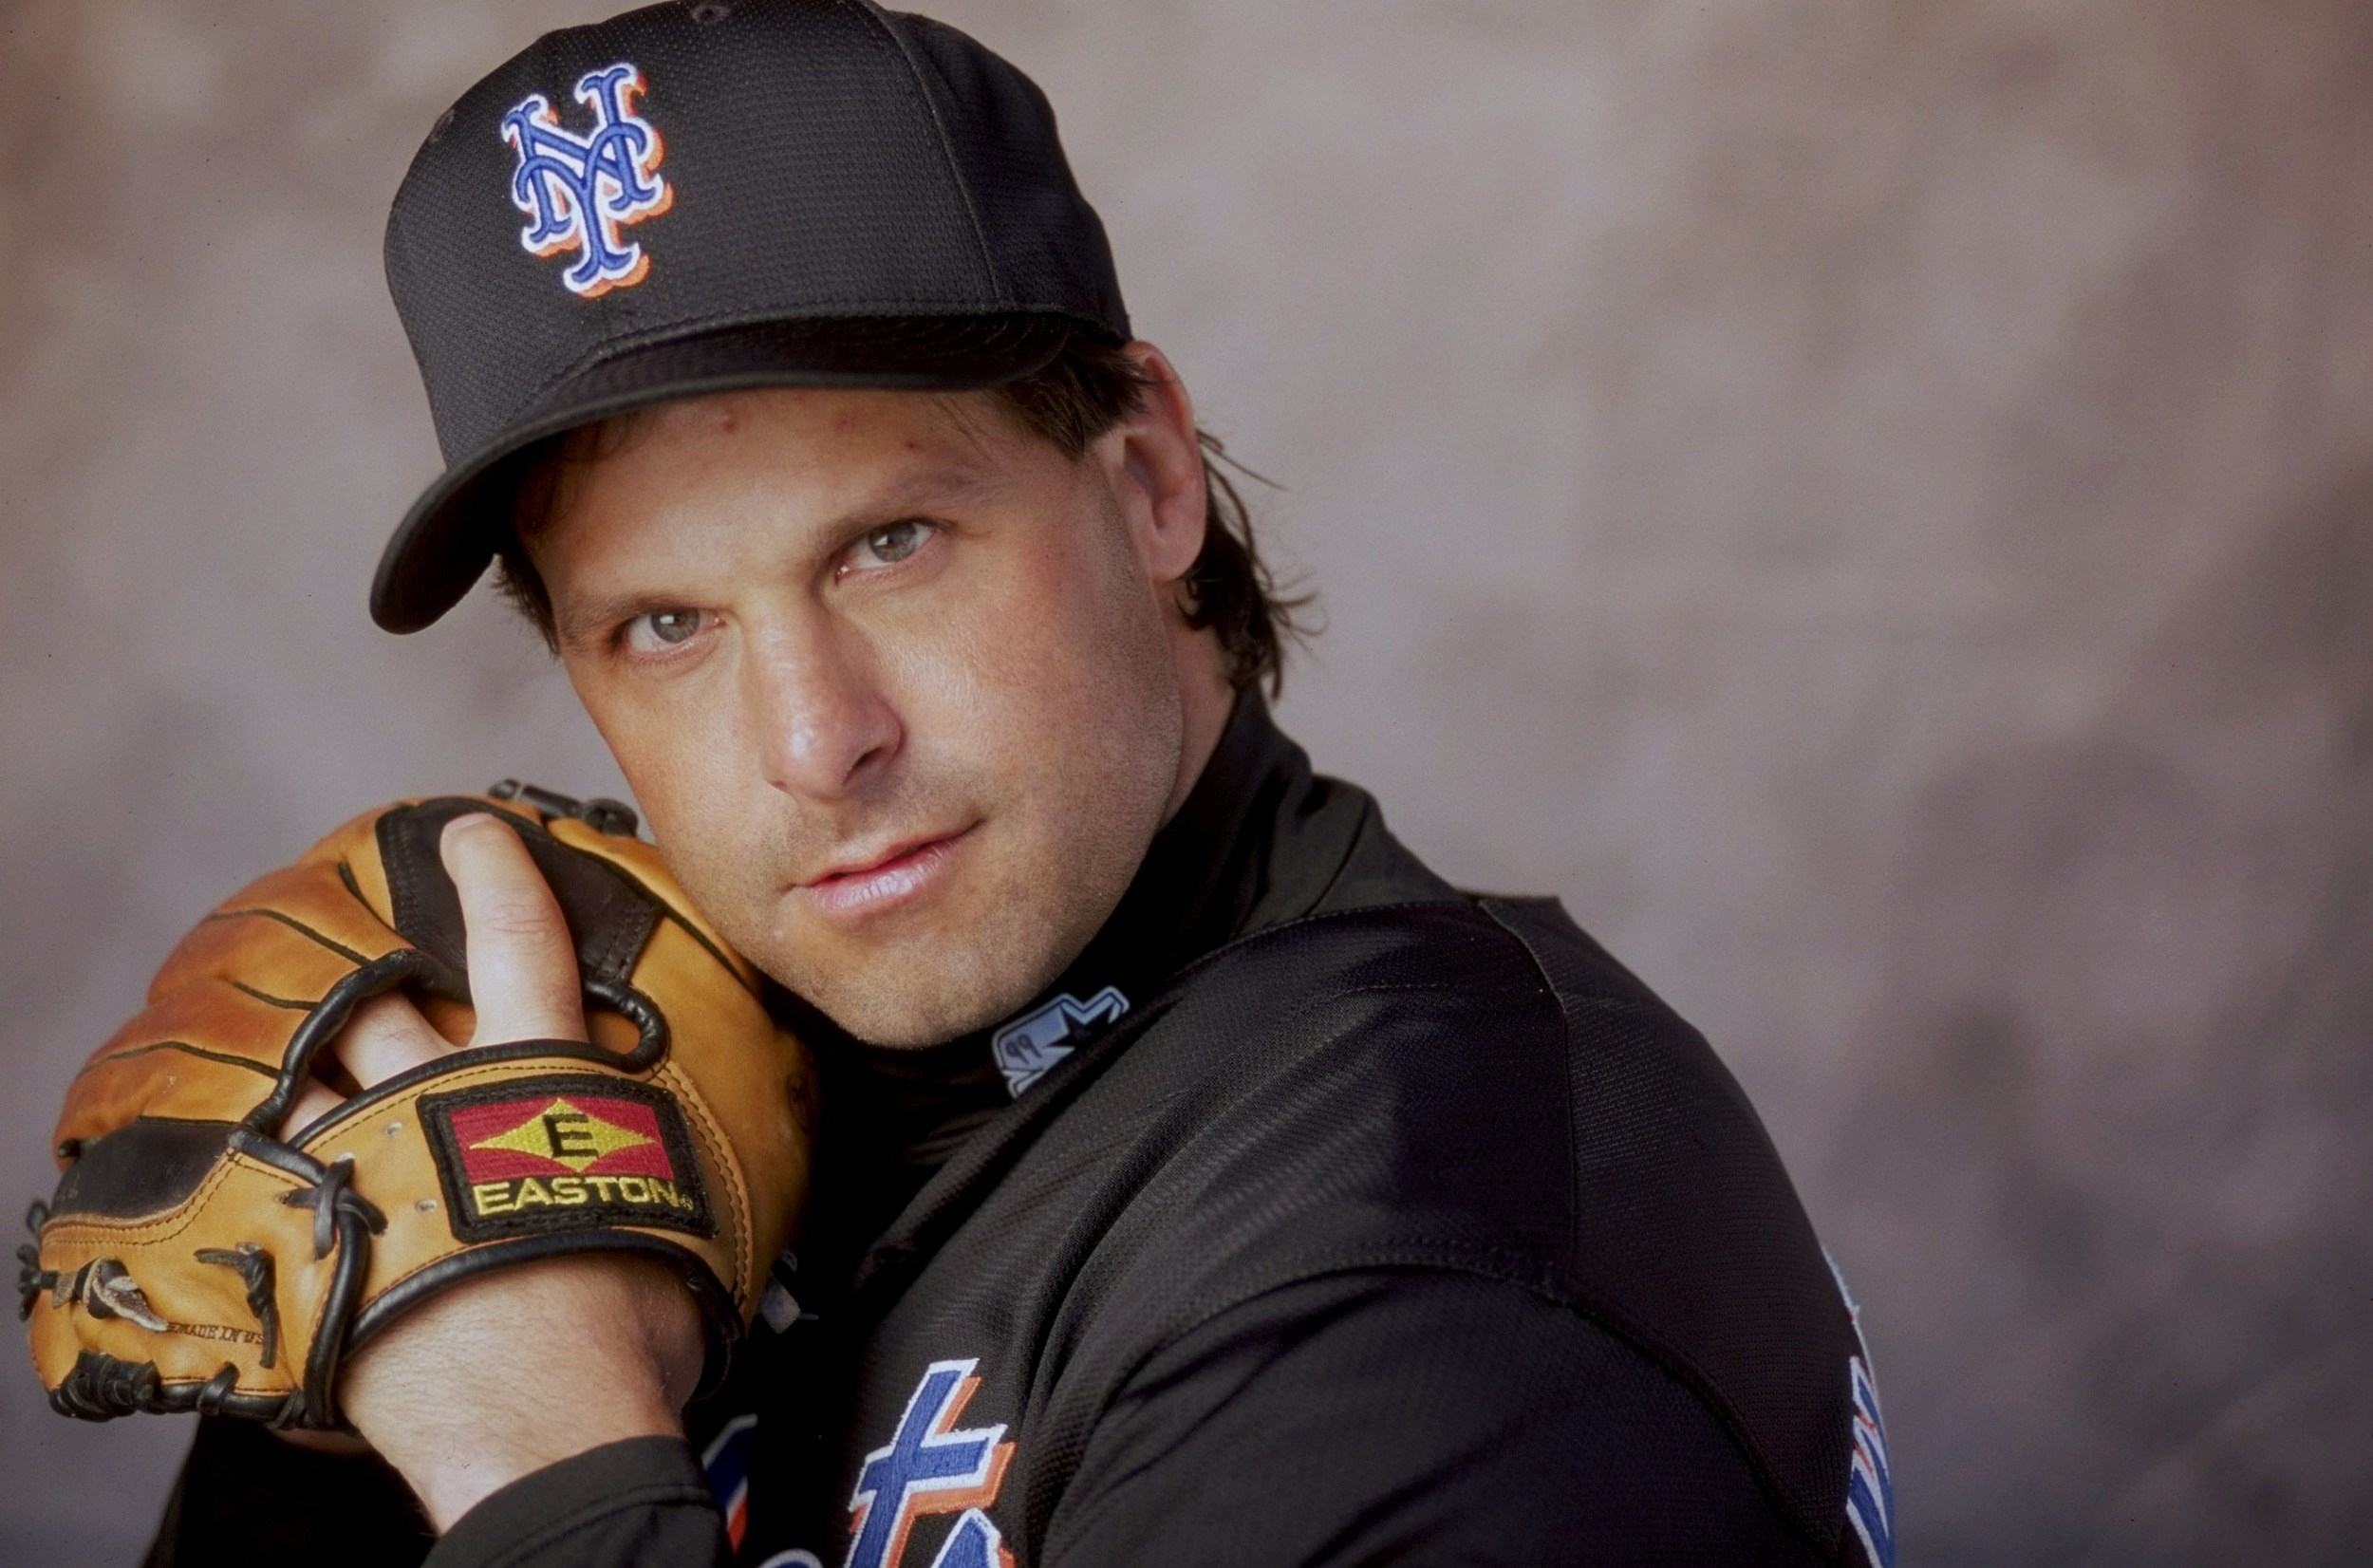 Orosco Set to Strike a Pose at Mets Old Timers' Day - Mets Insider